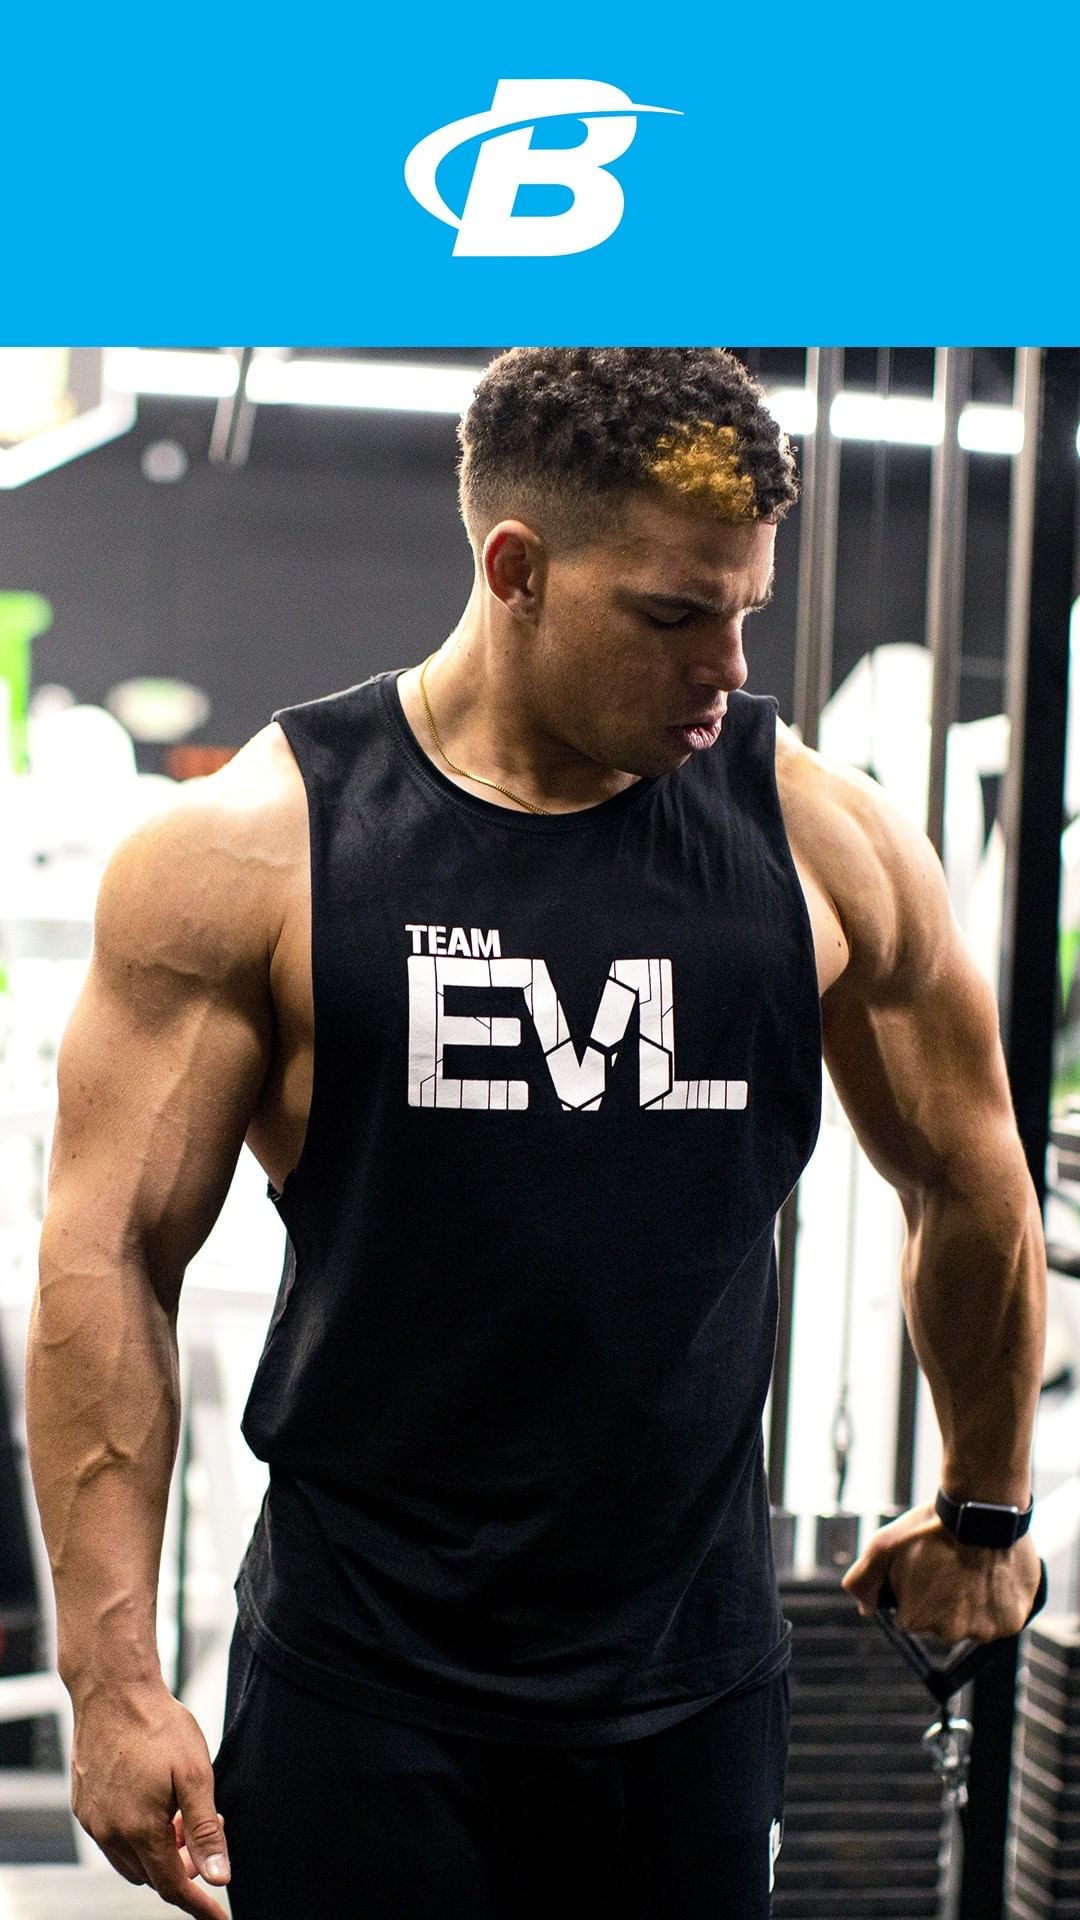 Bodybuilding.com - We Stuck IFBB Pro Jeremy Dutra in the middle of nowhere and told him to create the best damn shoulder workout. 

Athlete: @jeremydutra @evlsports 

When we asked IFBB Pro and EVL sp...